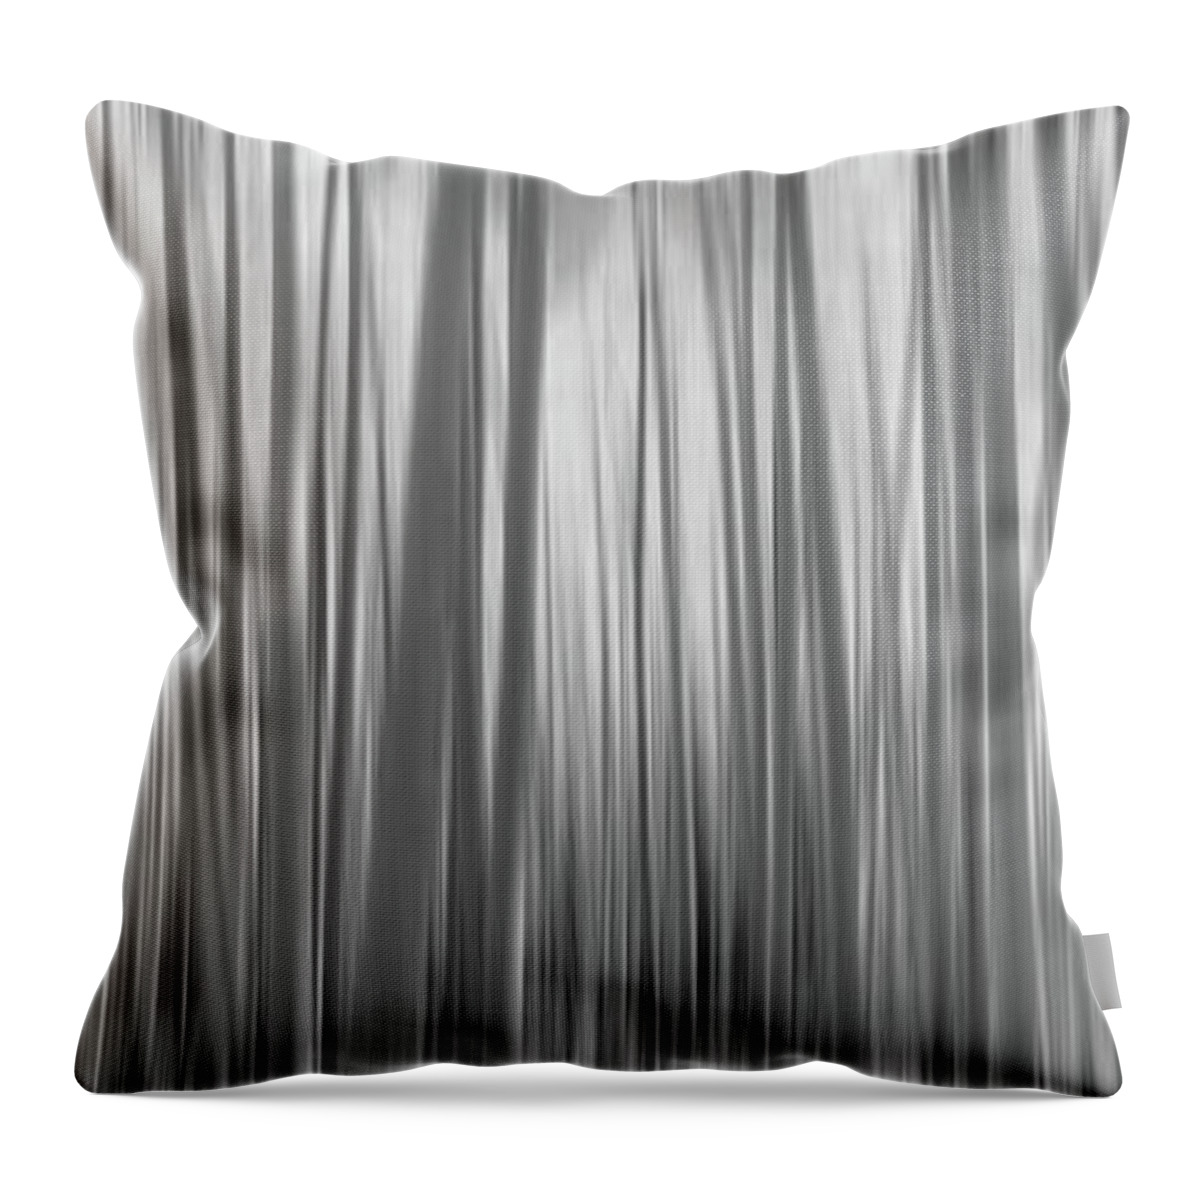 Yellow Aspen Trees Throw Pillow featuring the photograph Aspen Trees Abstract Pano BW by Michael Ver Sprill